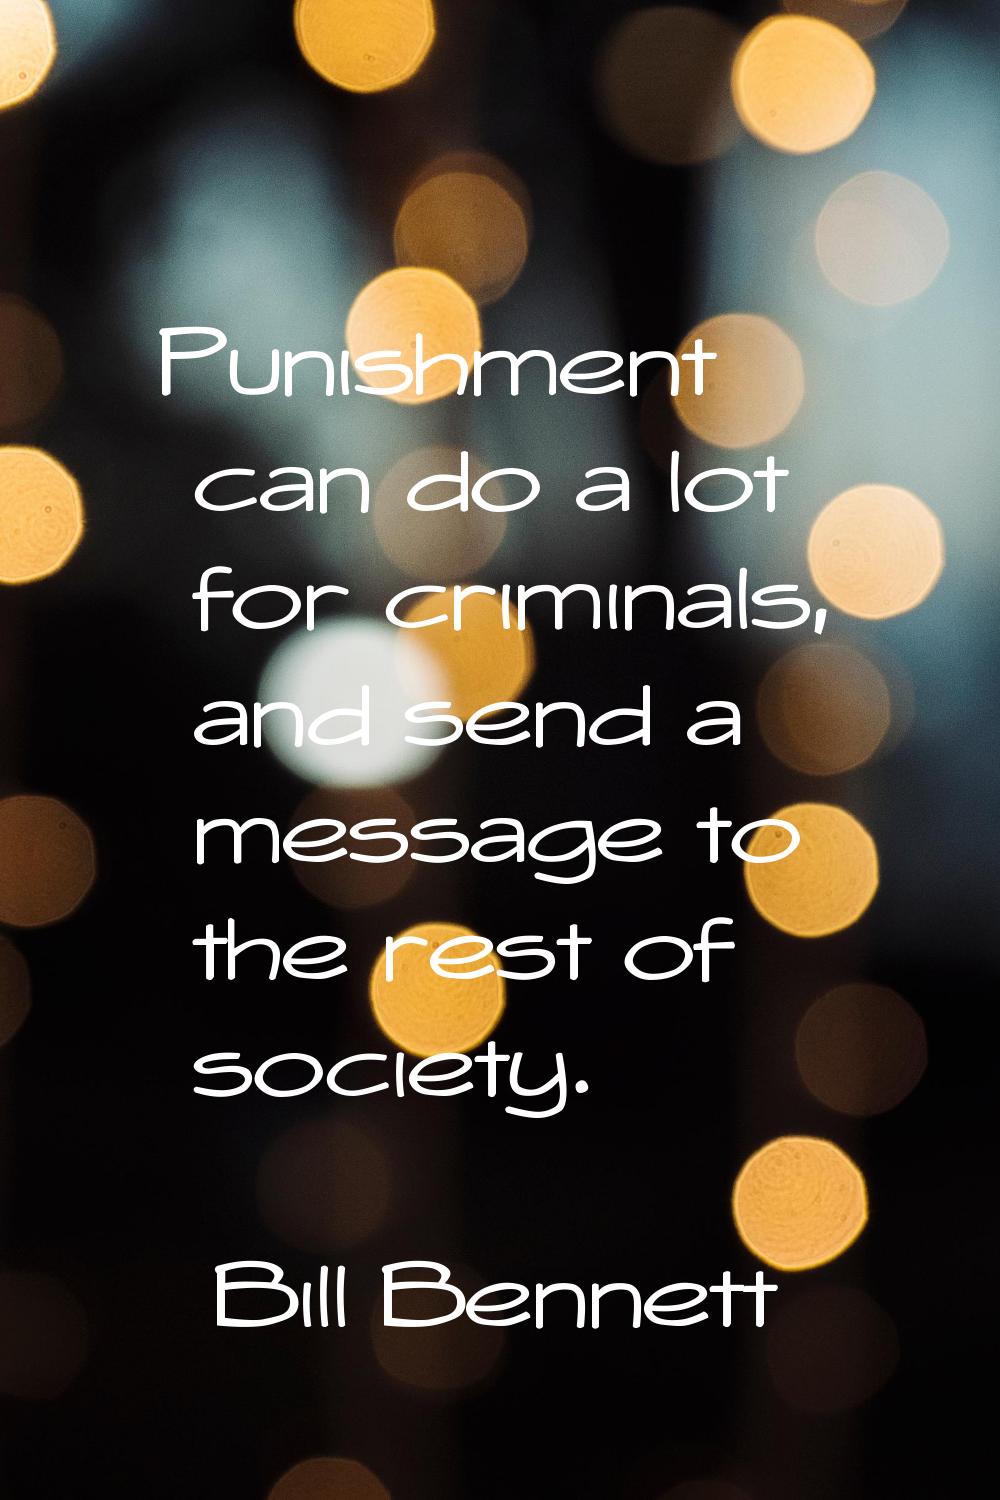 Punishment can do a lot for criminals, and send a message to the rest of society.